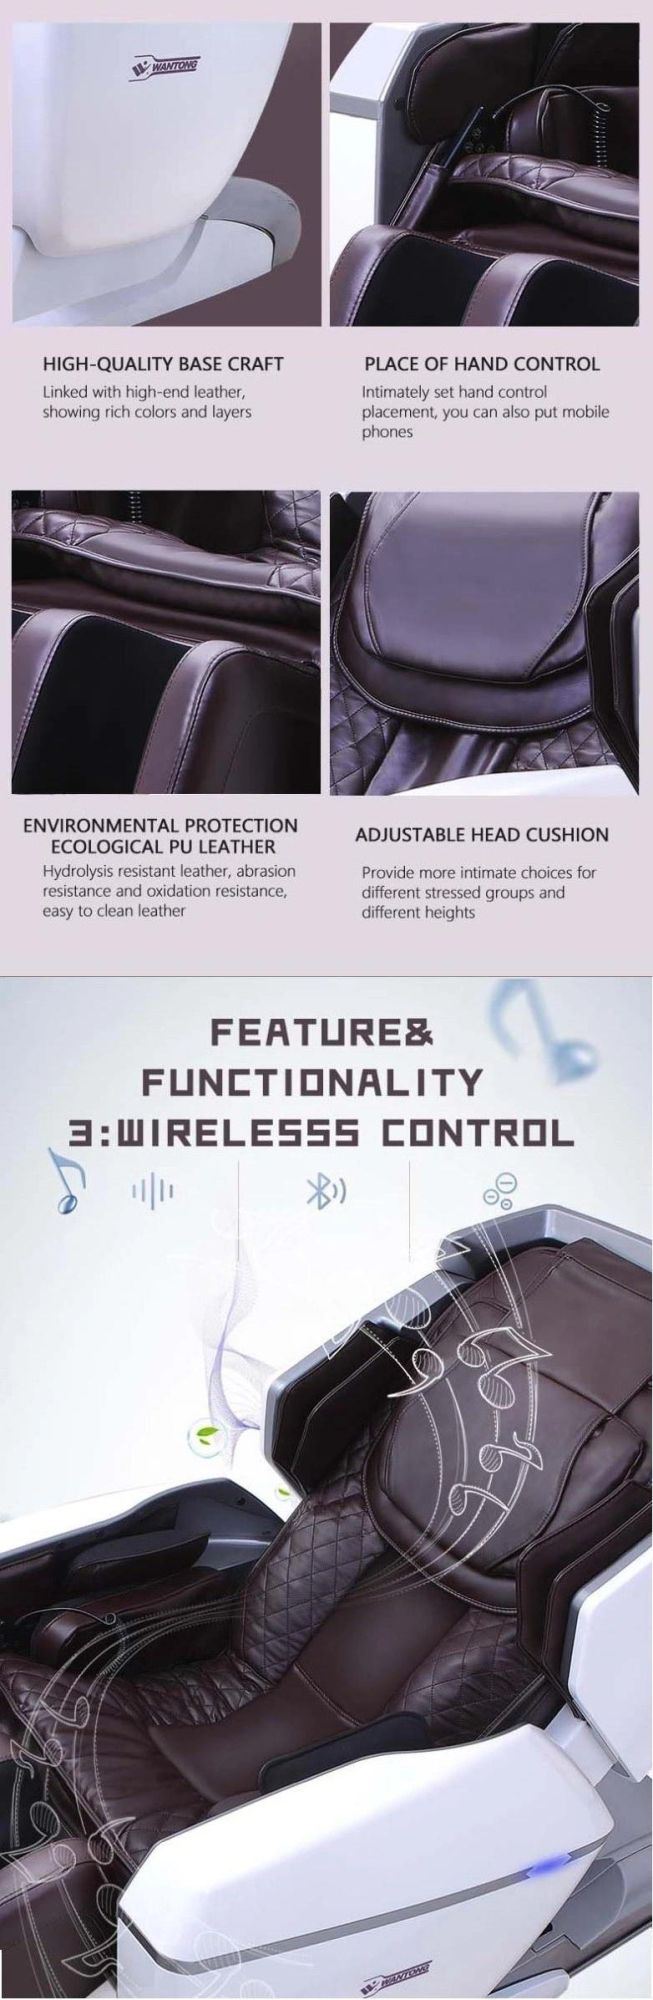 Latest Leather Touch Screen Technology Zero Gravity Cover Shiatsu Foot Massager Full Body Massage Chair ODM Welcome